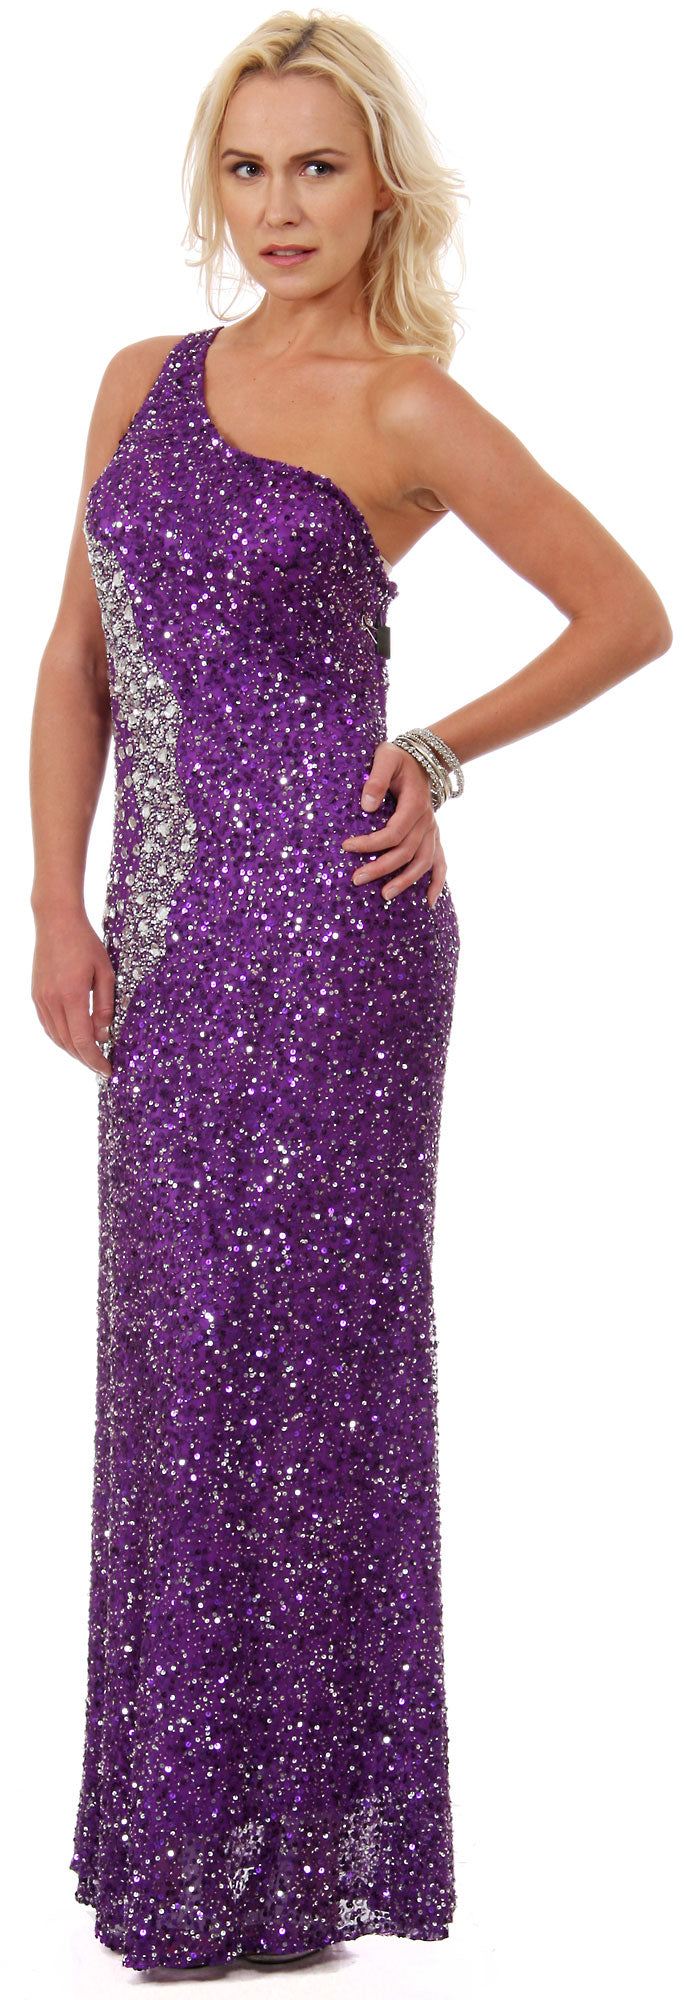 Main image of Long Sequined Formal Prom Dress With Rhinestones Waist